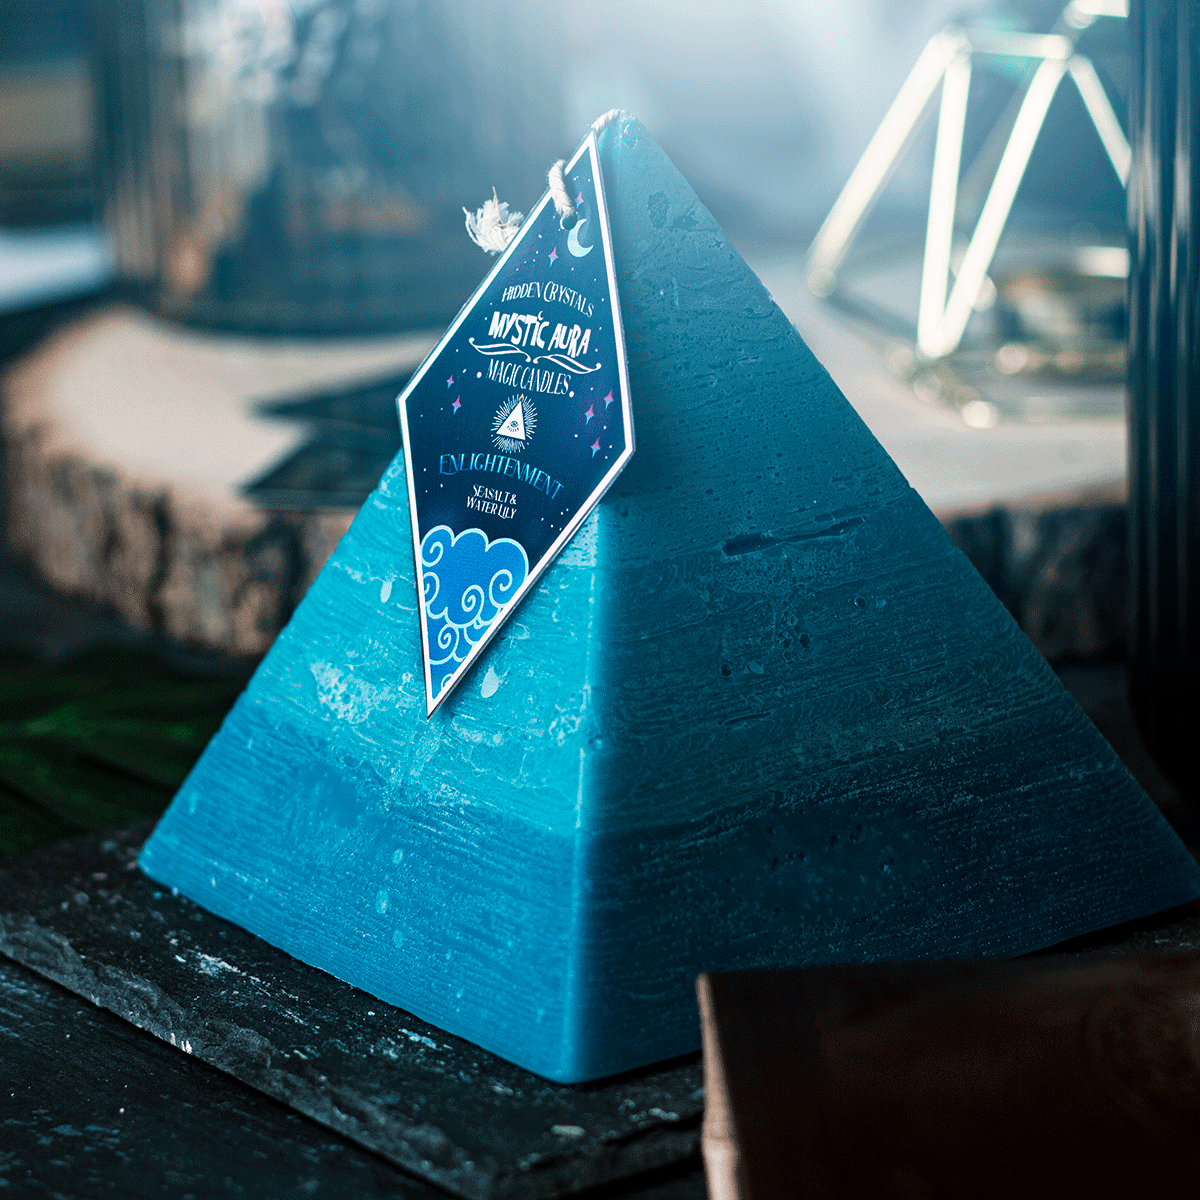 Enlightenment pyramid spell candle hidden crystals by Mystic Aura Candles, Blue / Dark Blue